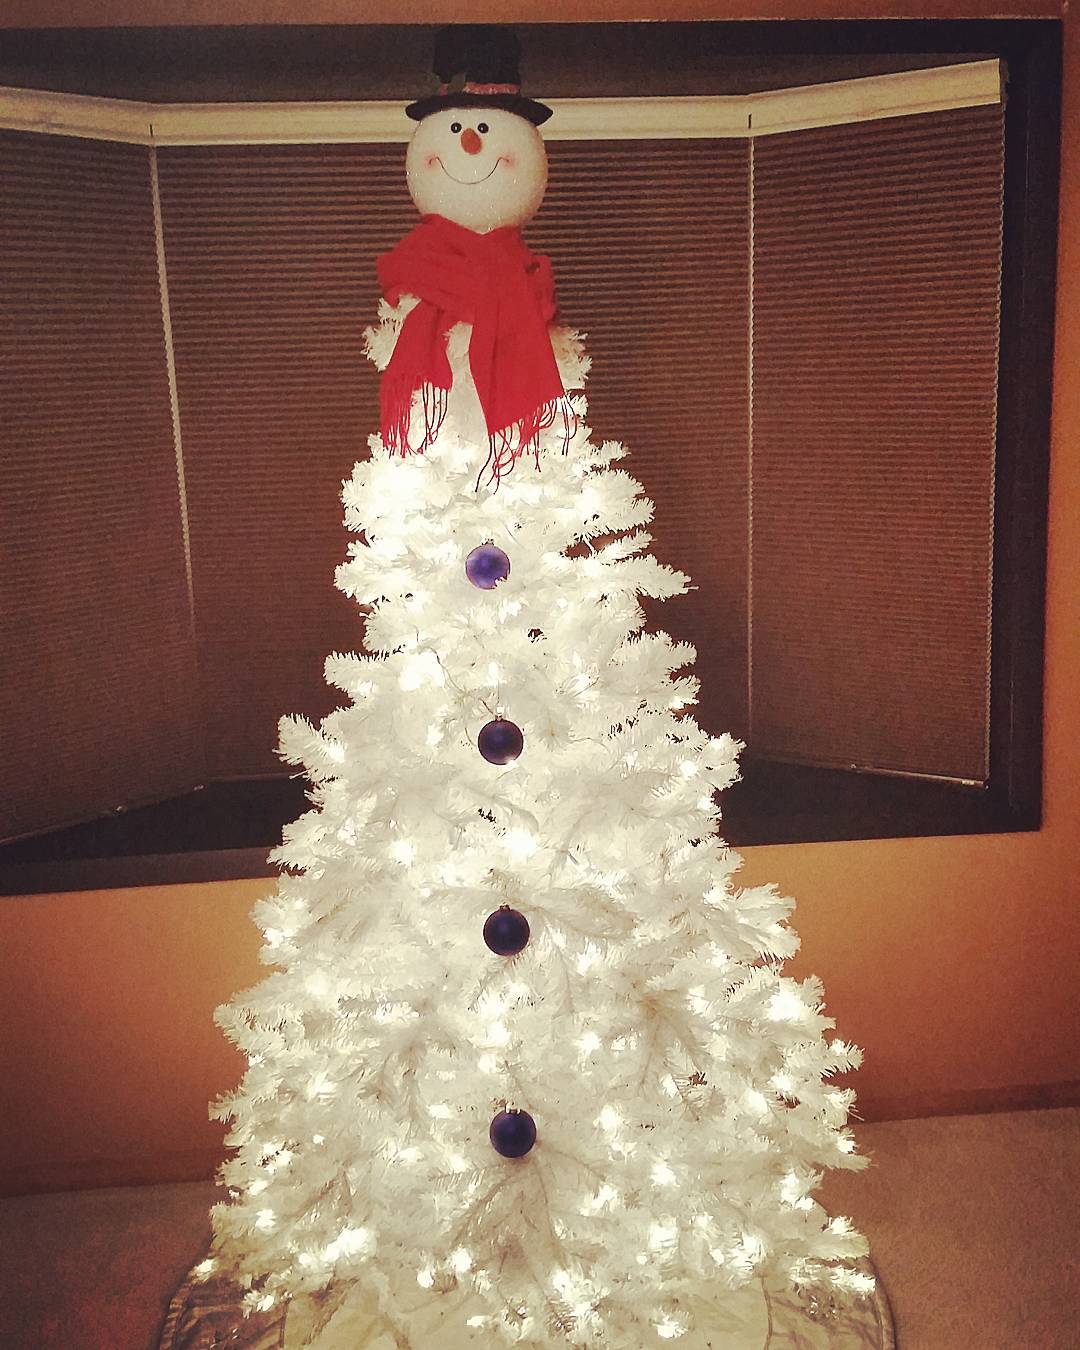 This year your tree can be a snowman!